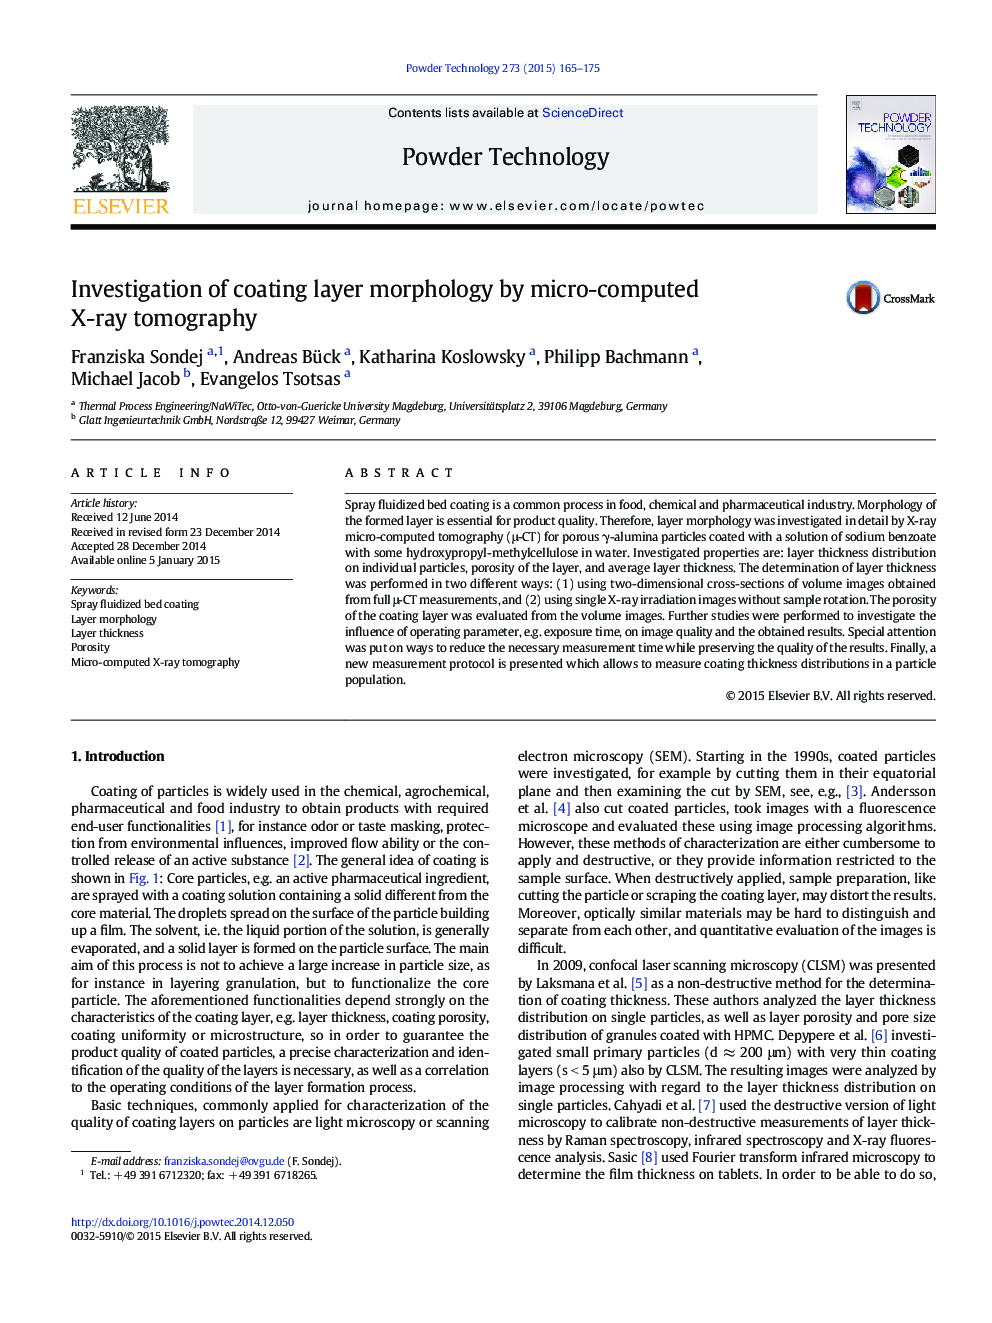 Investigation of coating layer morphology by micro-computed X-ray tomography